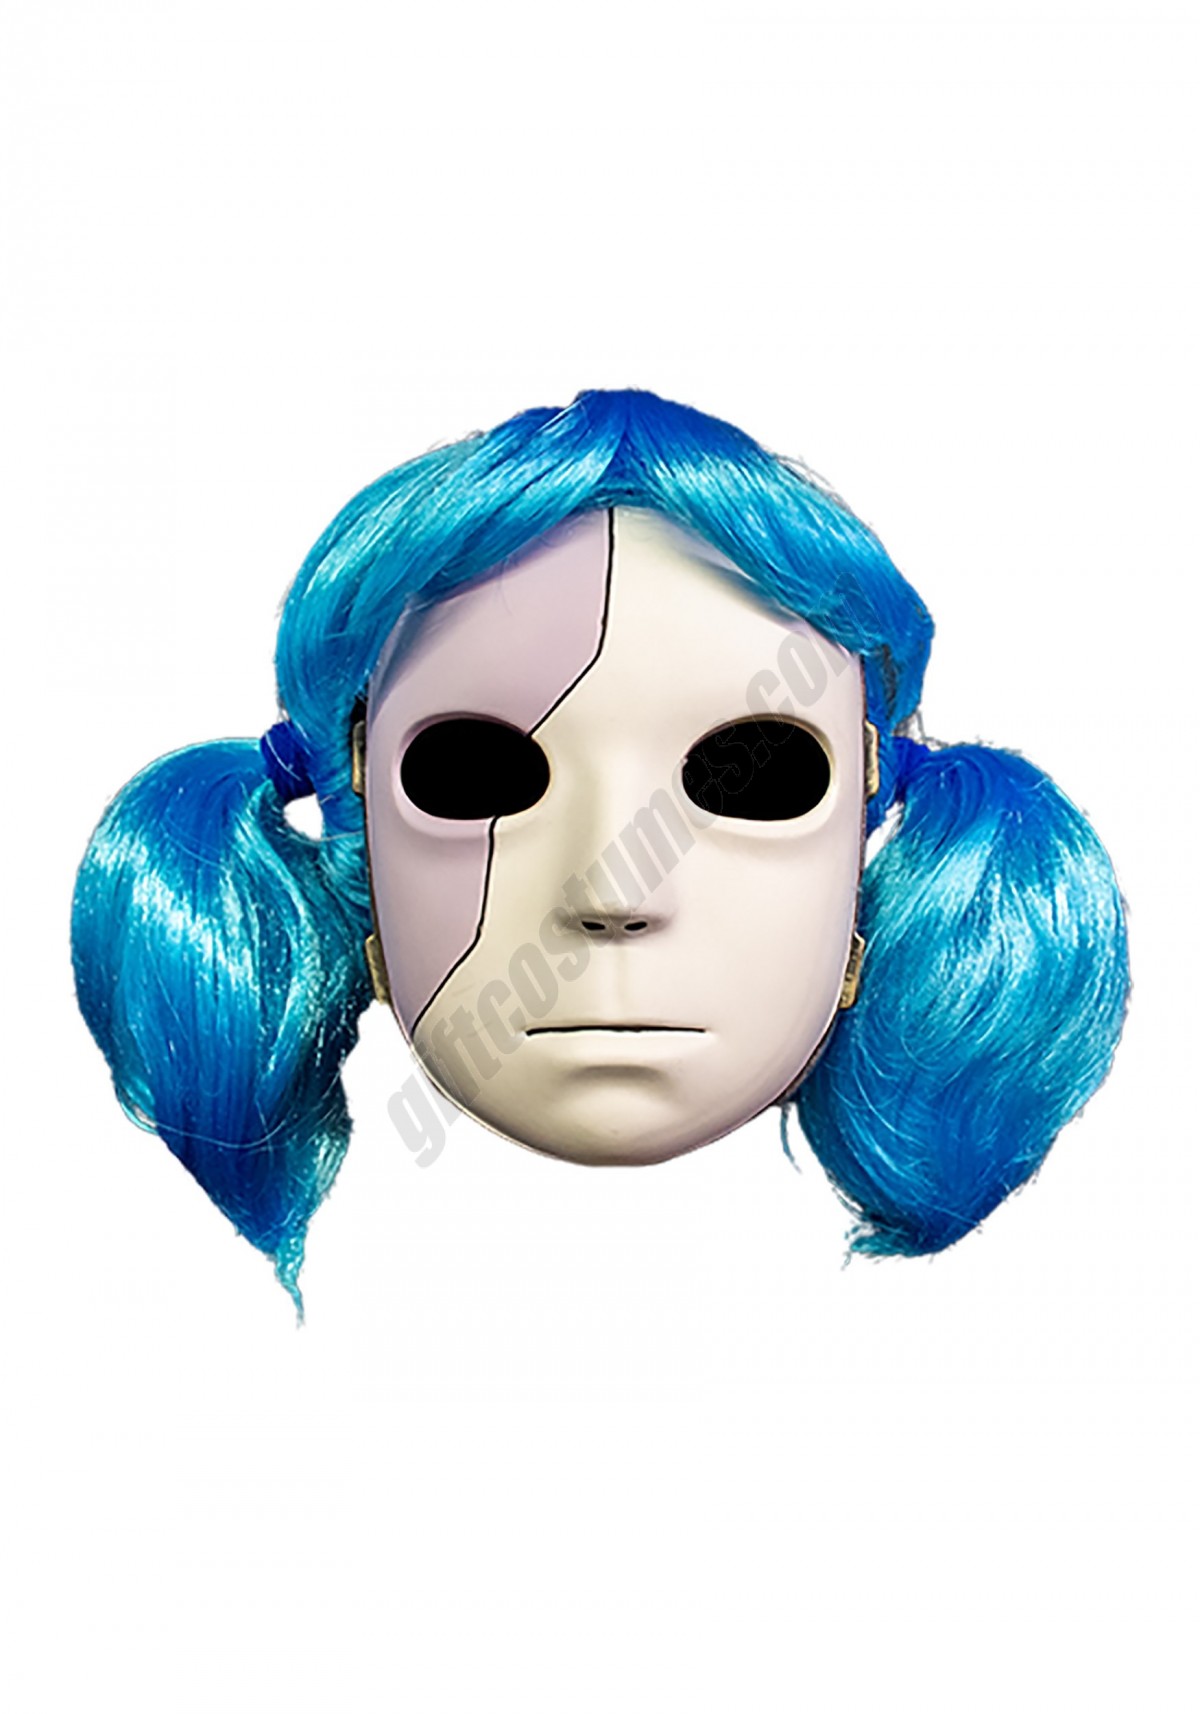 Sally Face Mask and Wig Combo for Adults Promotions - -0